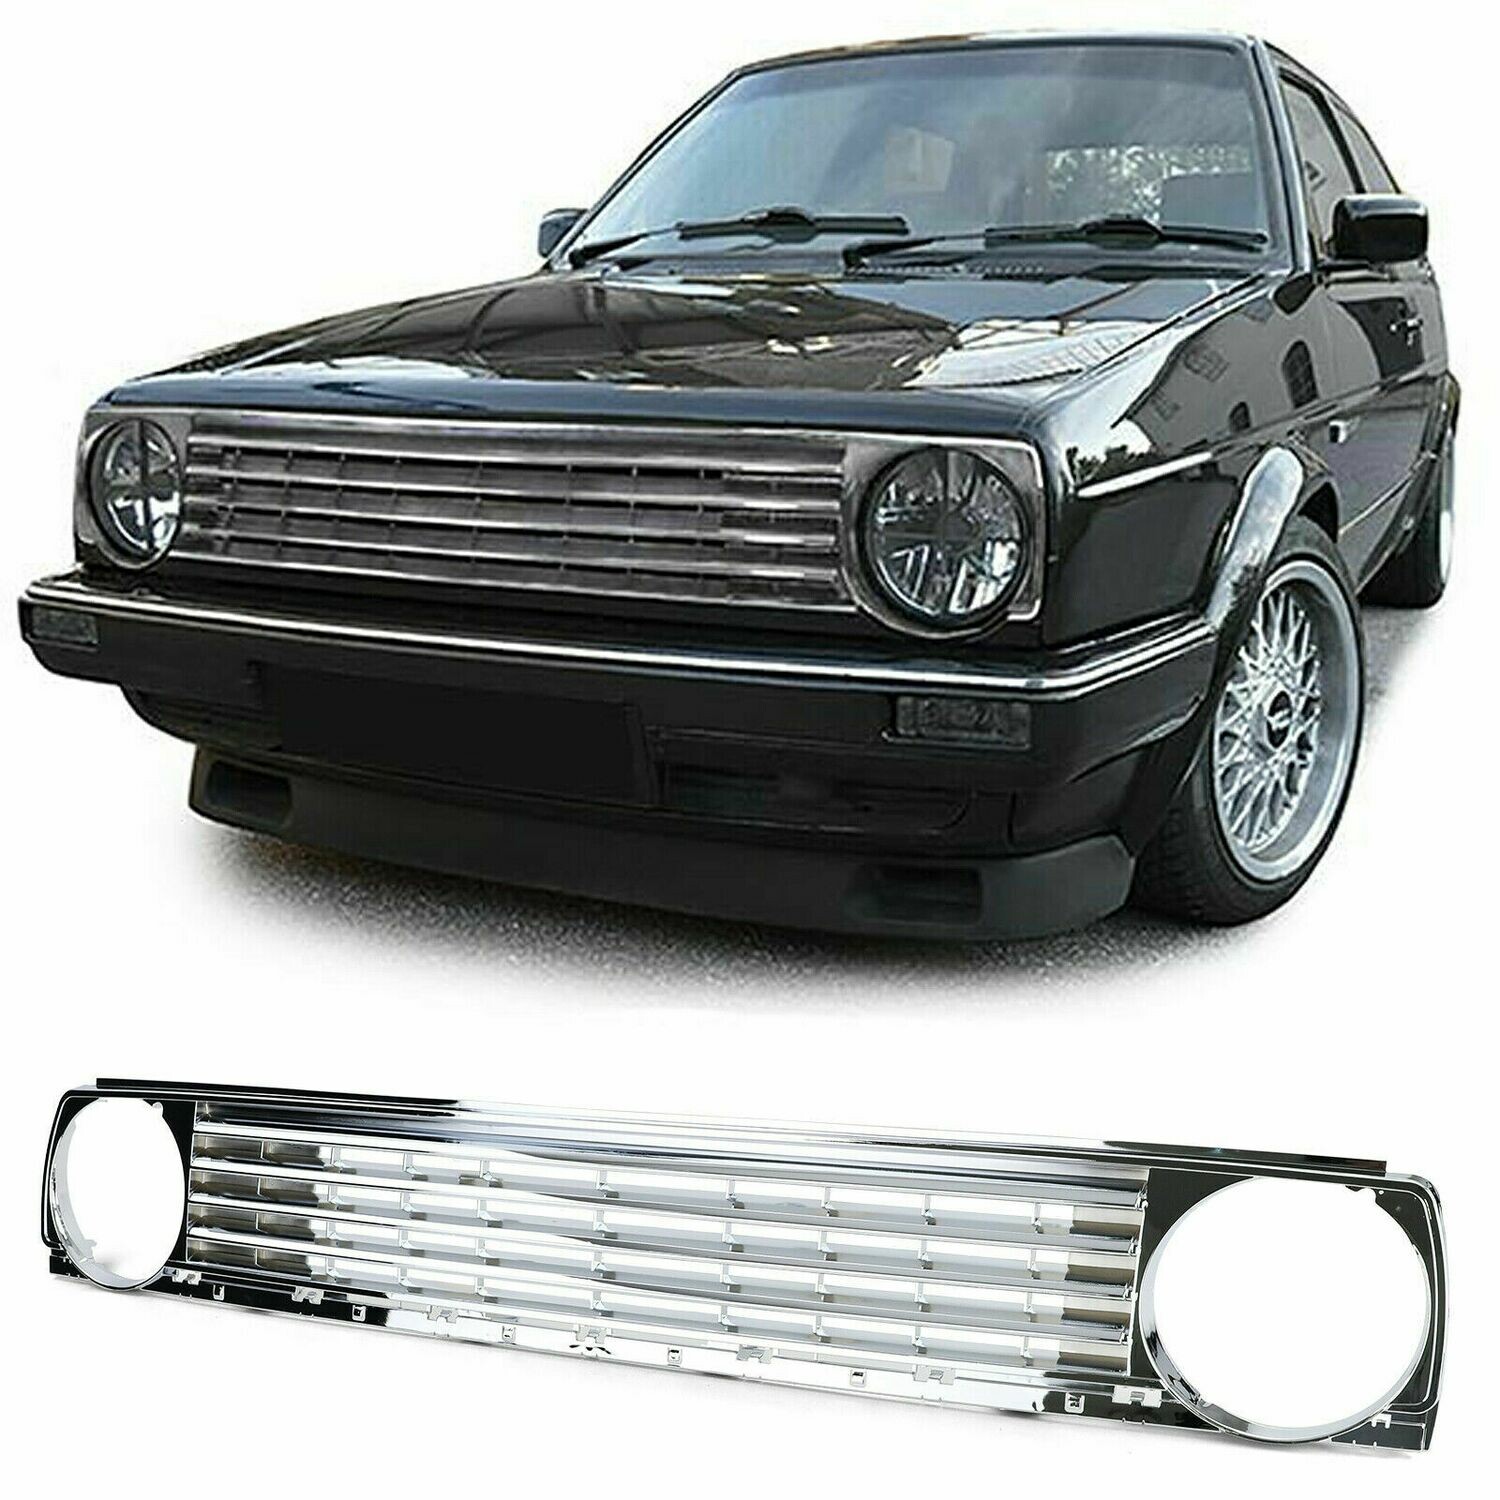 Sport Grill CHROM for VW GOLF 2 83-91 – Monster Tuning Parts – Design Art  since 1997